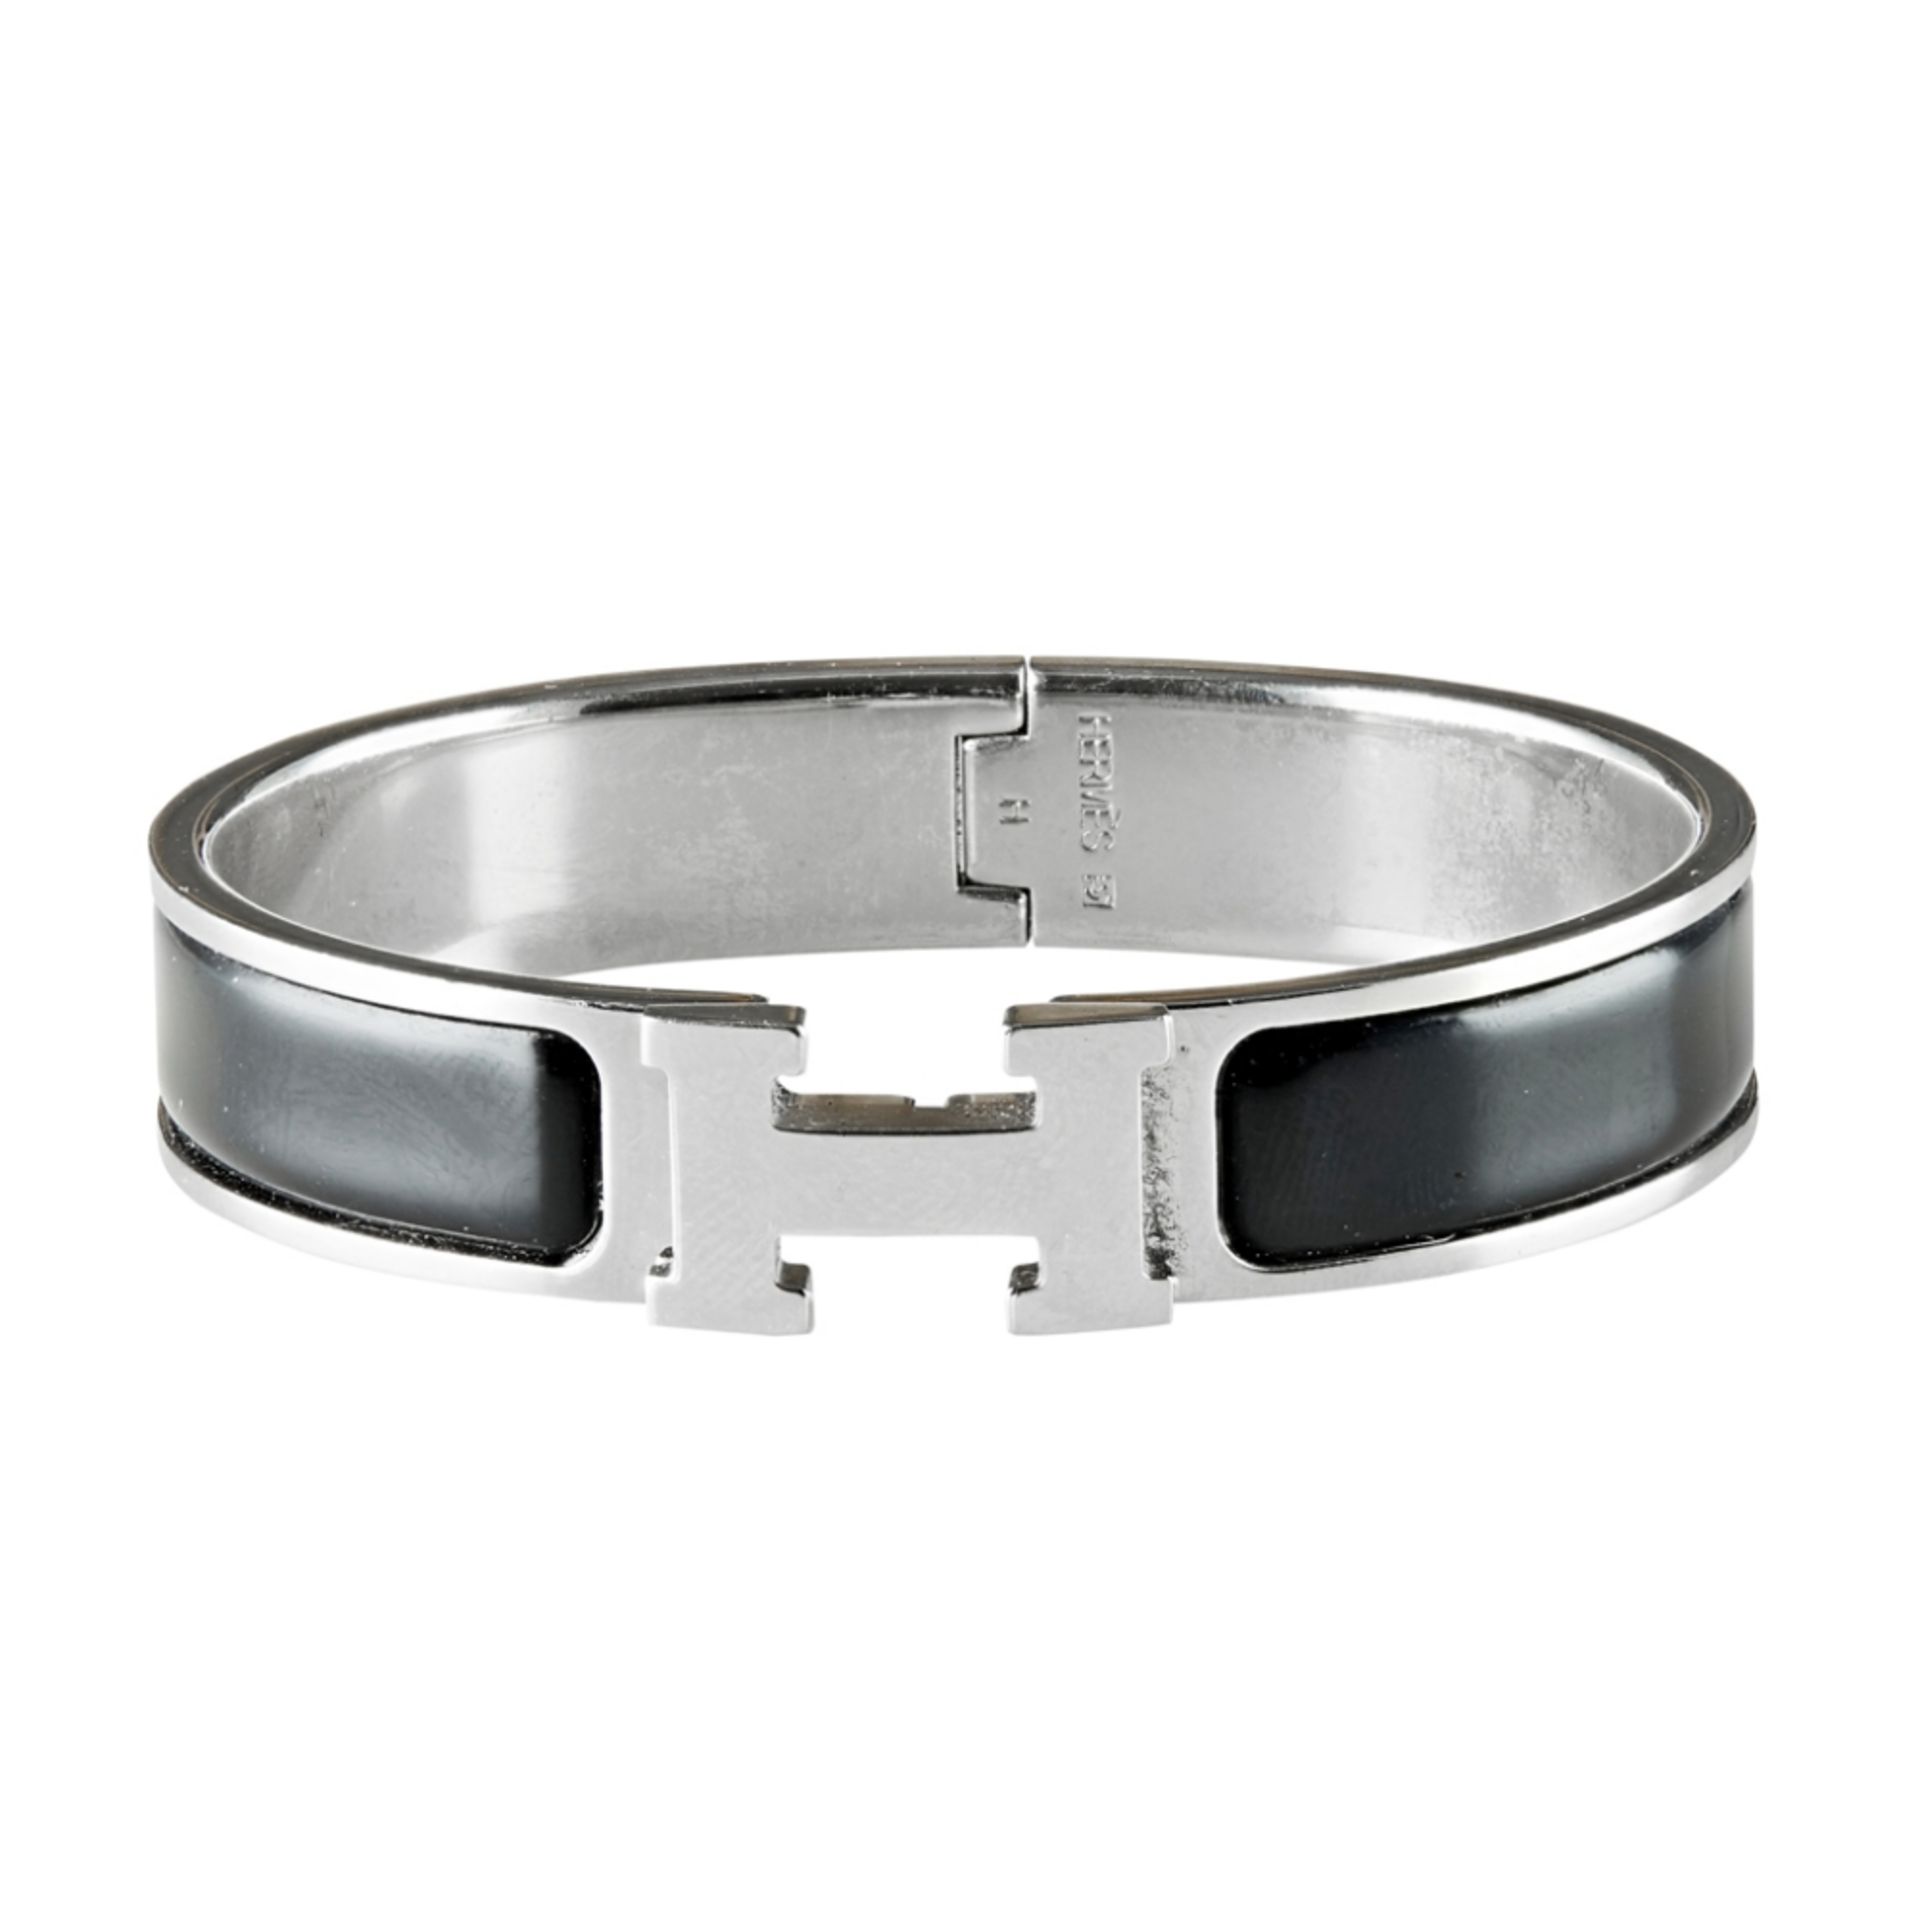 A 'Clic H Bracelet', Hermes of hinged design, with black enamel ground, H detail clasp, stamped